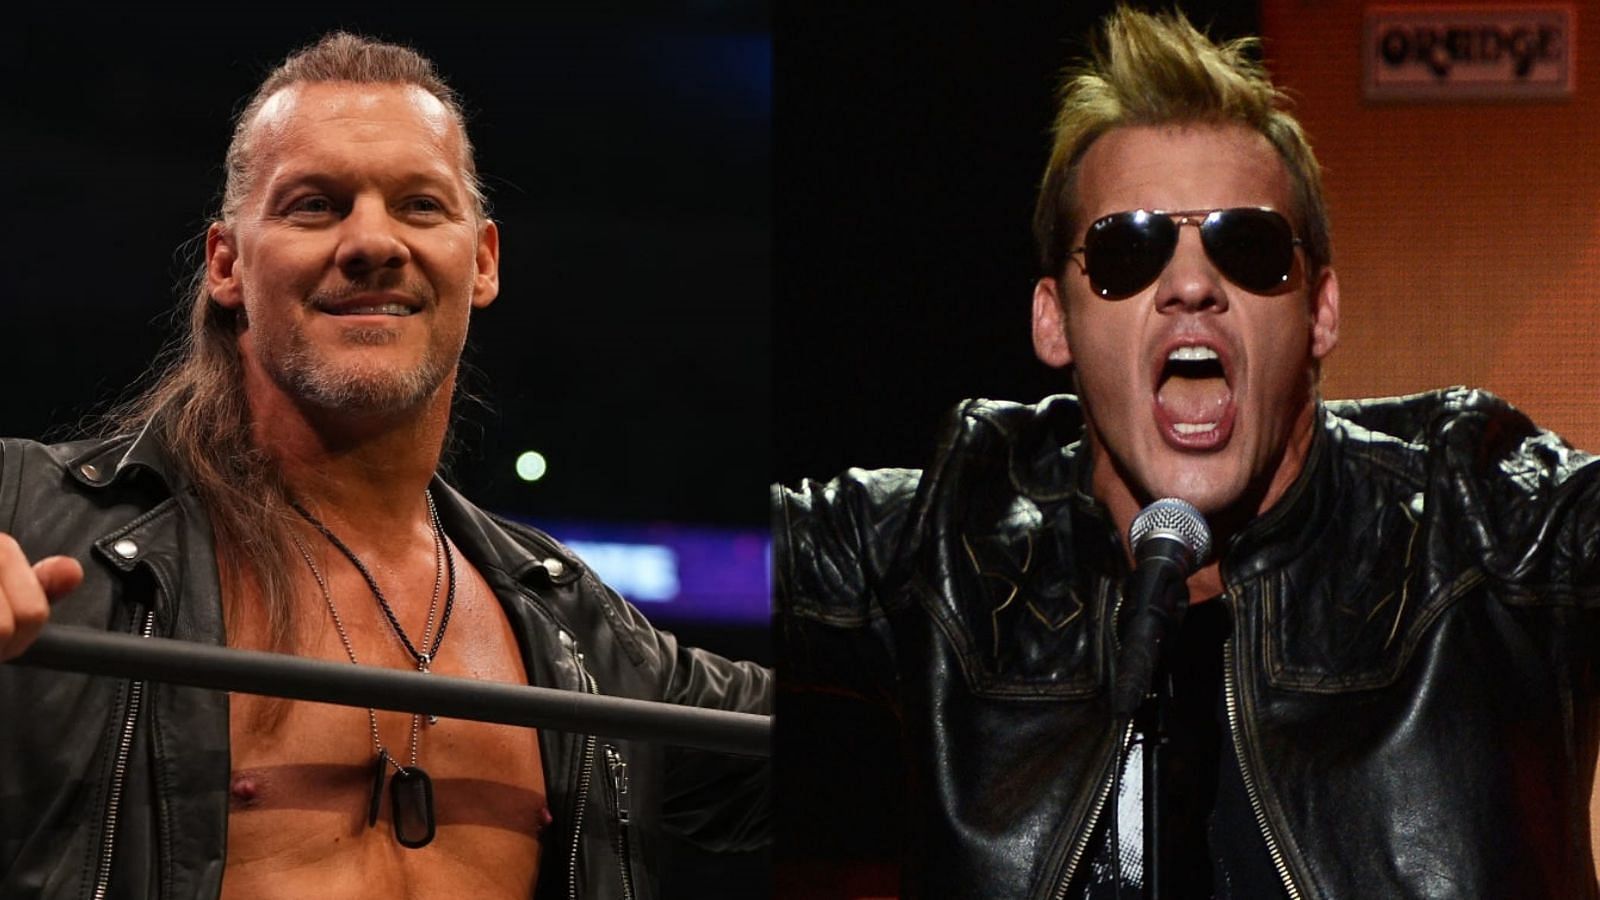 Chris Jericho is a big name in the wrestling business